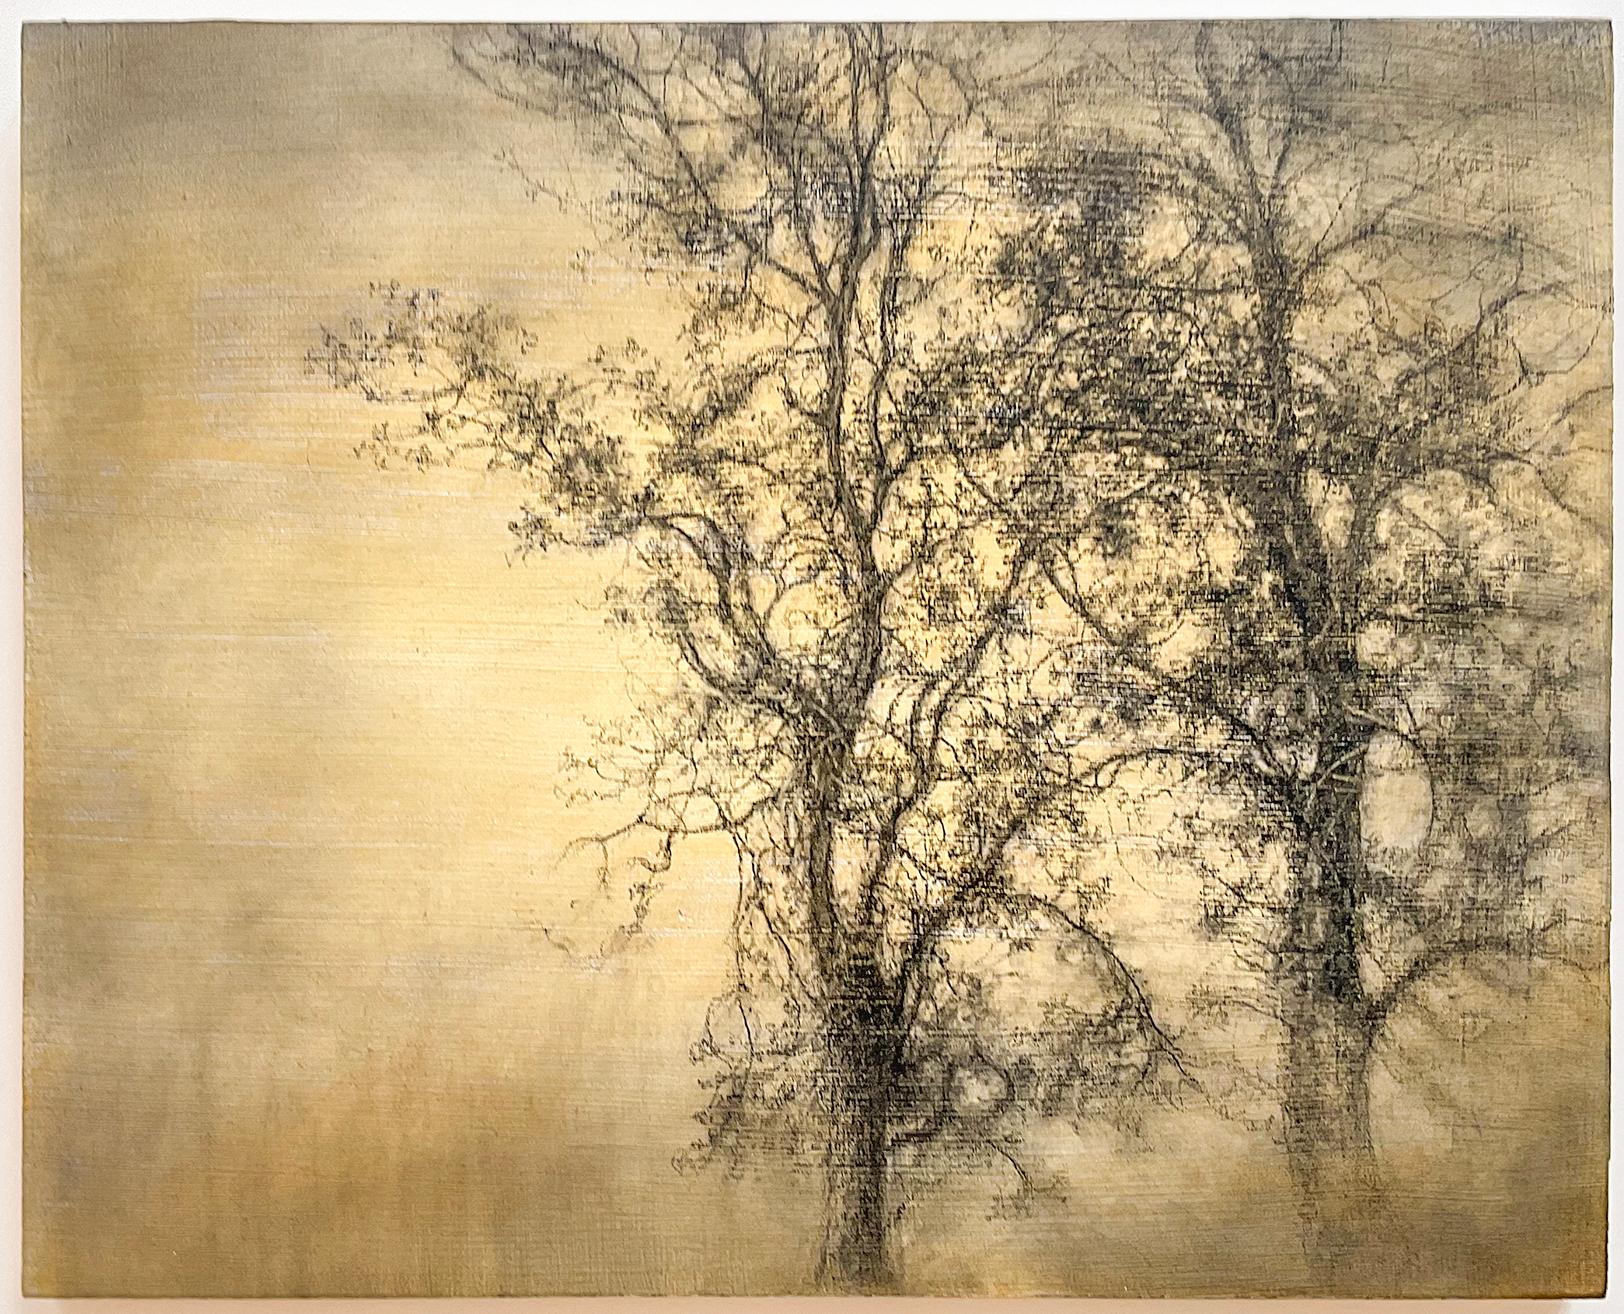 Sue Bryan Figurative Art - Two Trees: Realistic Charcoal Landscape Drawing of Trees on Pale Yellow